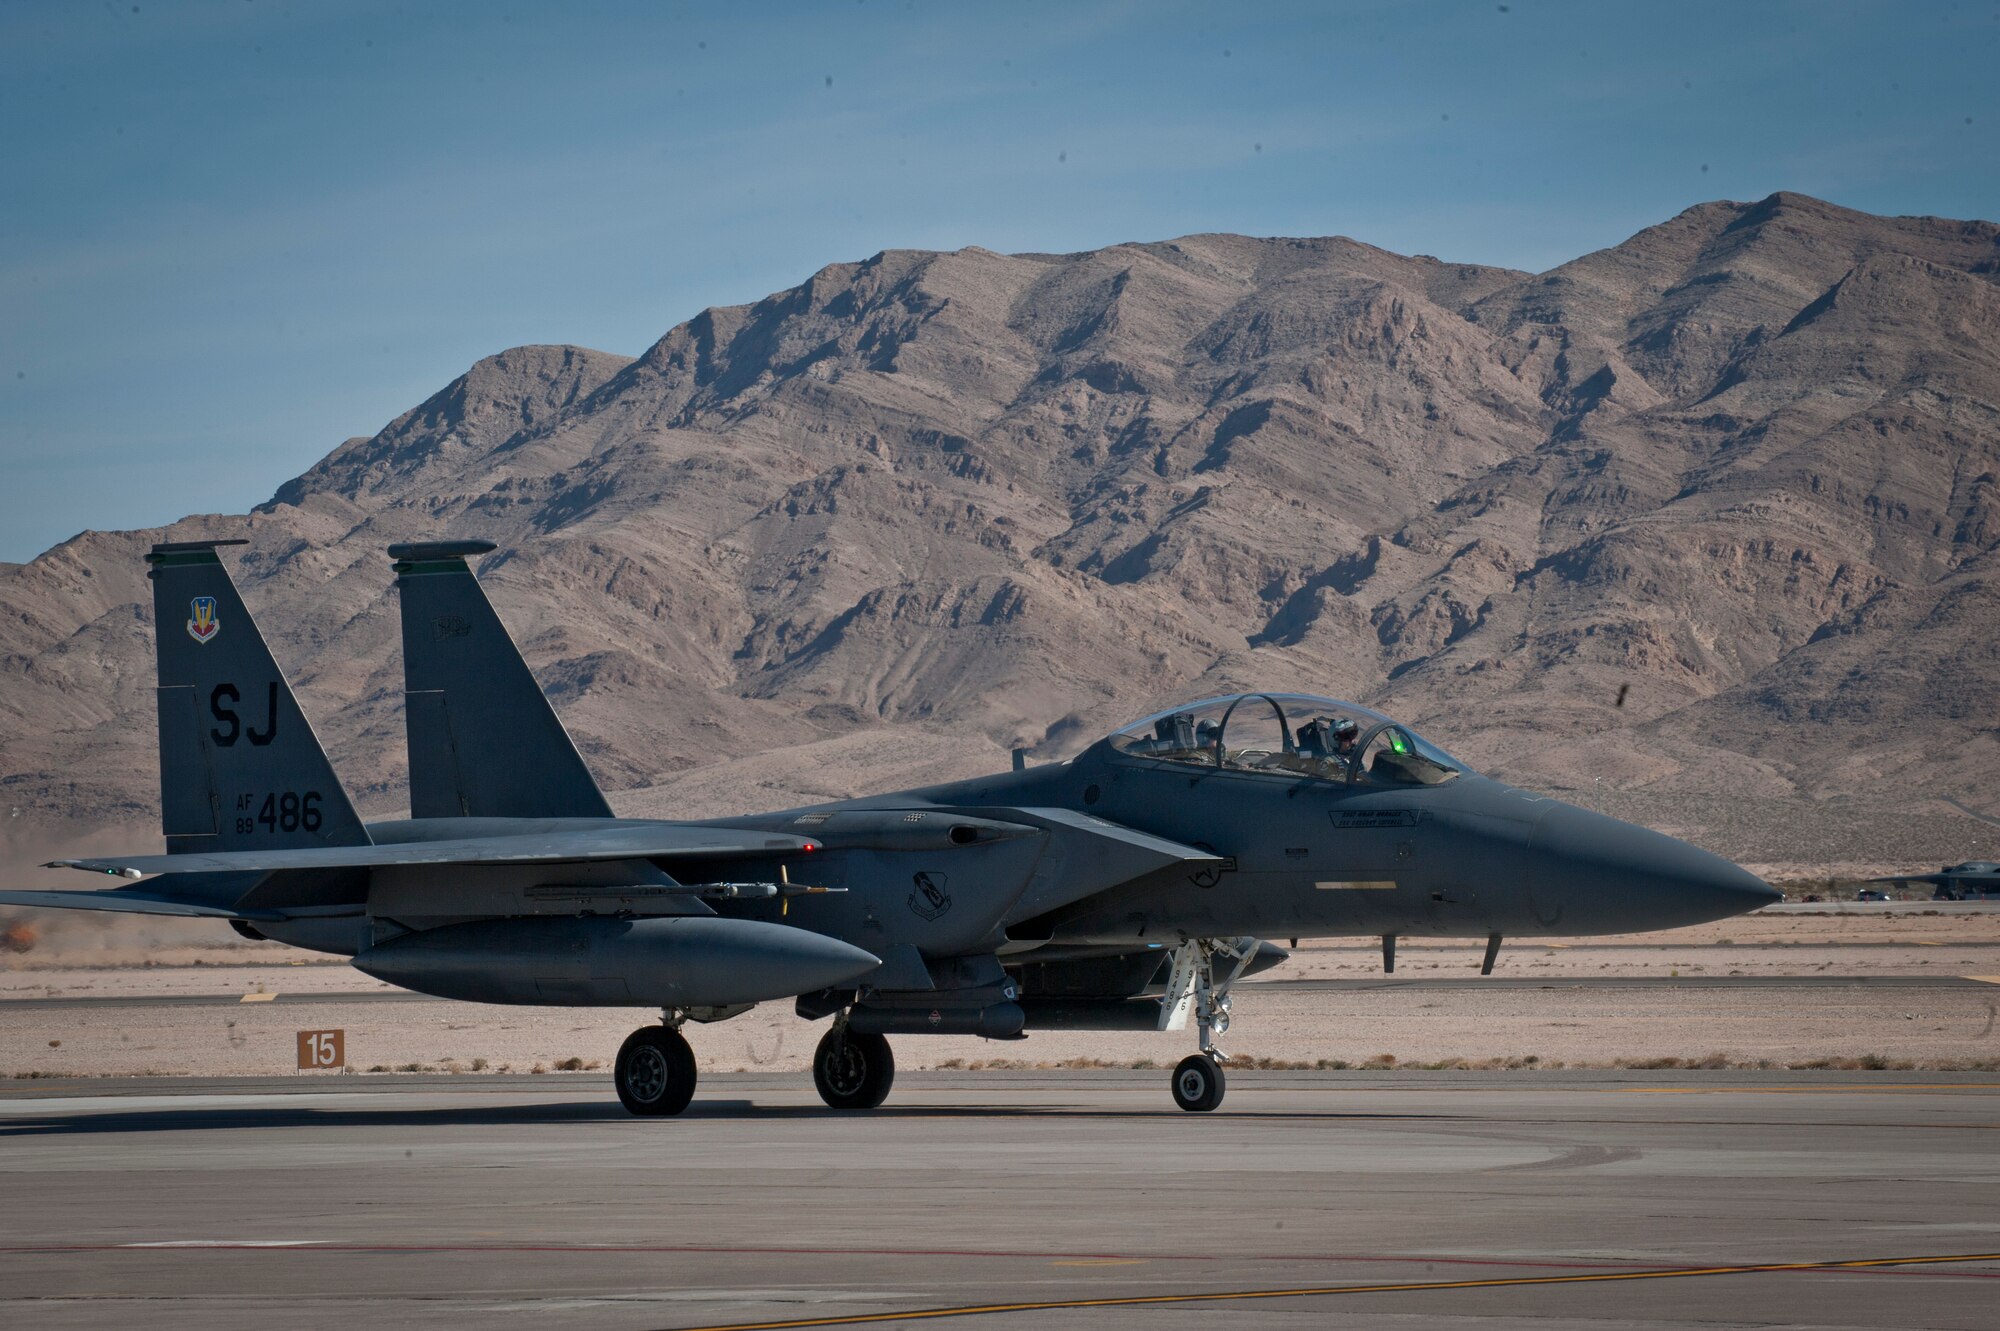 An F-15E Strike Eagle assigned to the 335th Fighter Squadron, Seymour Johnson Air Force Base, N.C., taxis off the runway after landing from a Red Flag 15-1 training sortie at Nellis Air Force Base, Nev., Feb. 2, 2015. Red Flag sorties are typically flown twice a day, a pace that tests both the crews in the air and the maintenance professionals on the ground charged with keeping aircraft in the fight. (U.S. Air Force photo by Airman 1st Class Joshua Kleinholz)